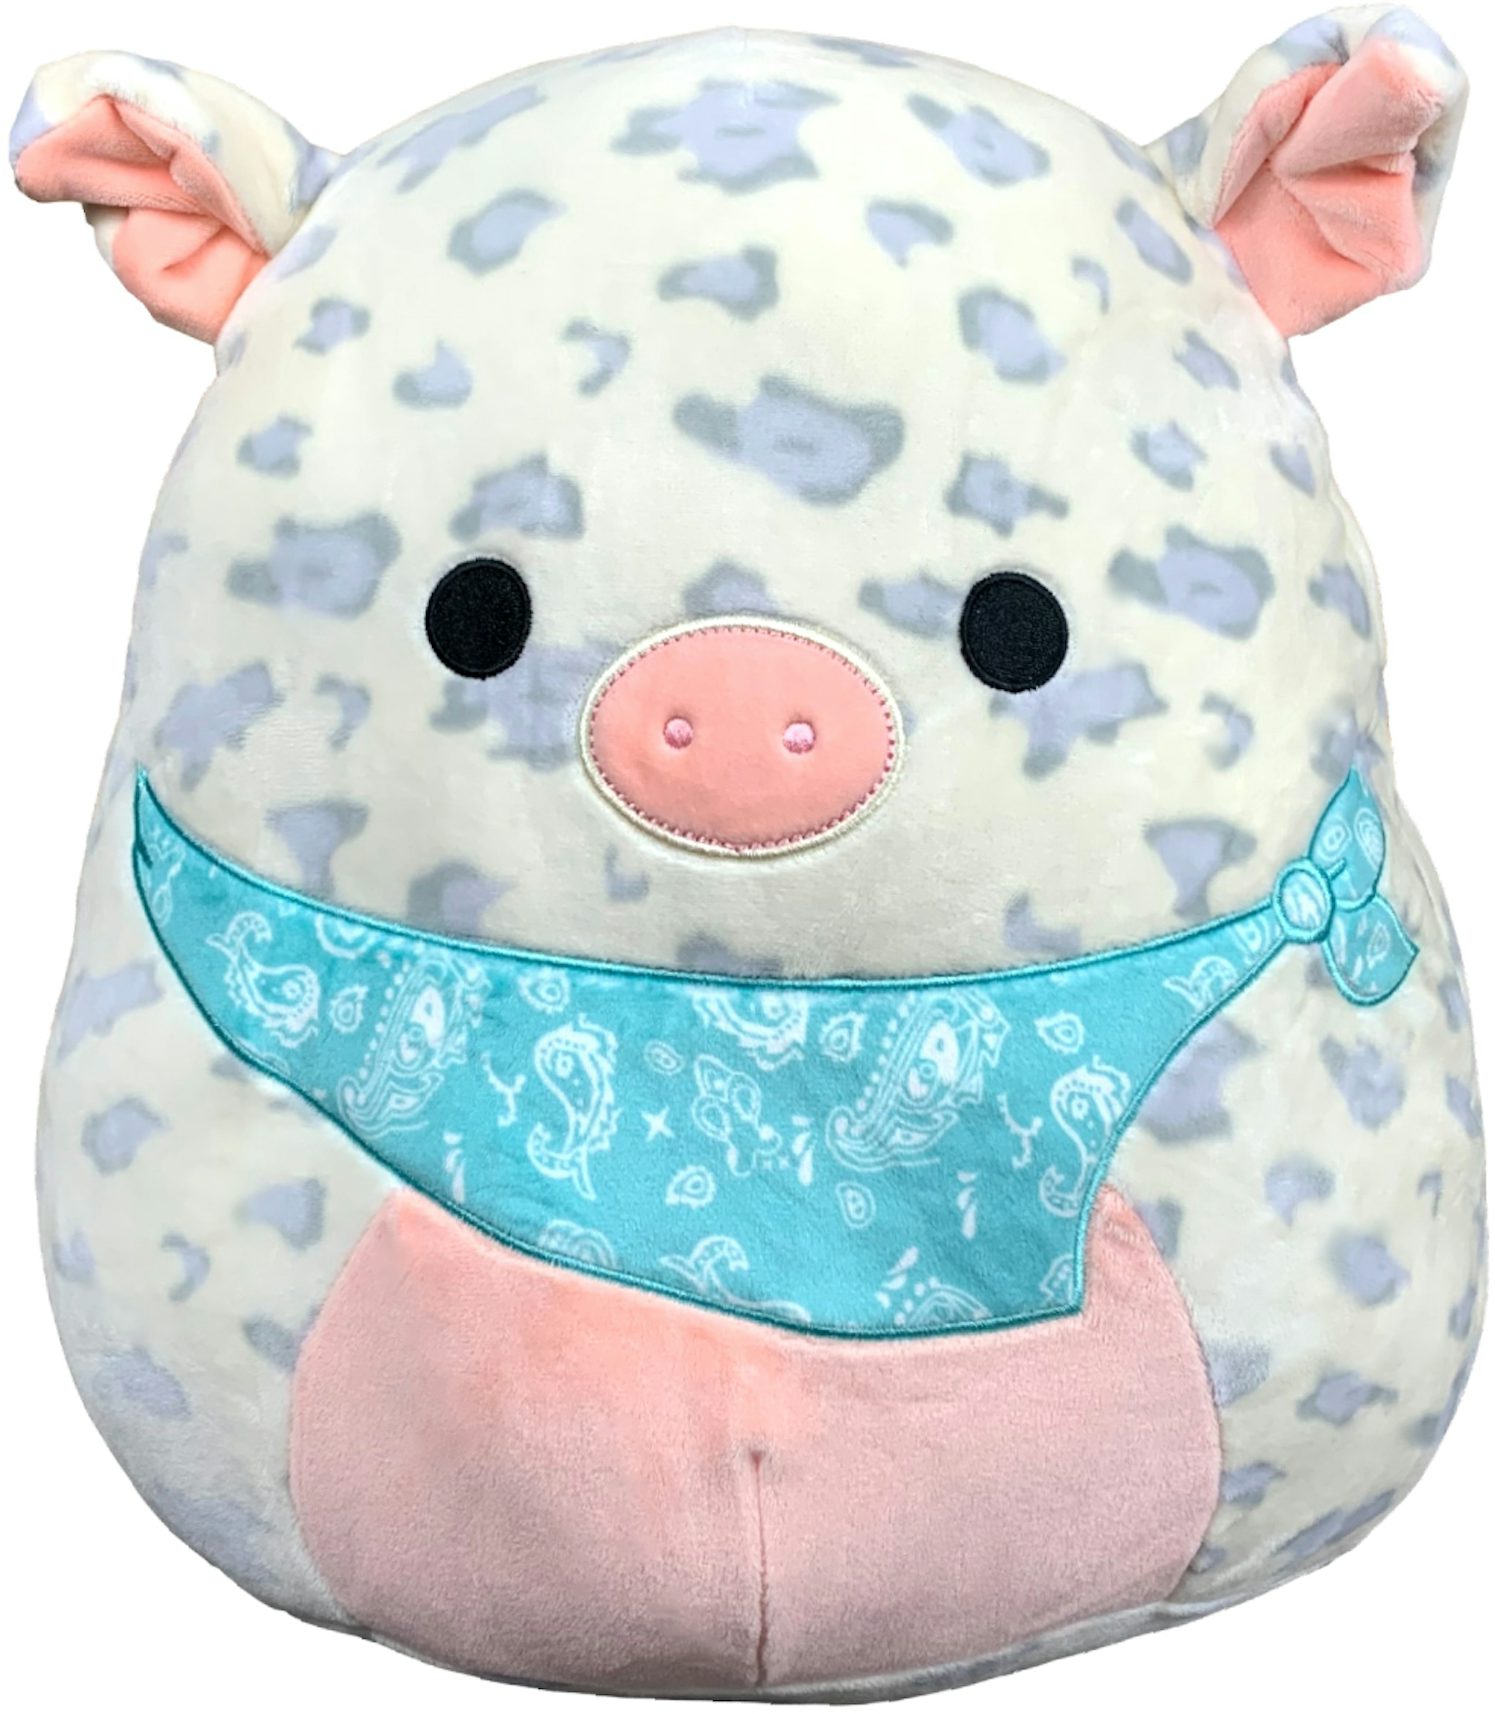 https://images.stockx.com/images/Squishmallow-Rosie-The-Pig-8-Inch-With-Bandana-Plush-White-Turquoise.jpg?fit=fill&bg=FFFFFF&w=1200&h=857&fm=jpg&auto=compress&dpr=2&trim=color&updated_at=1617819349&q=60